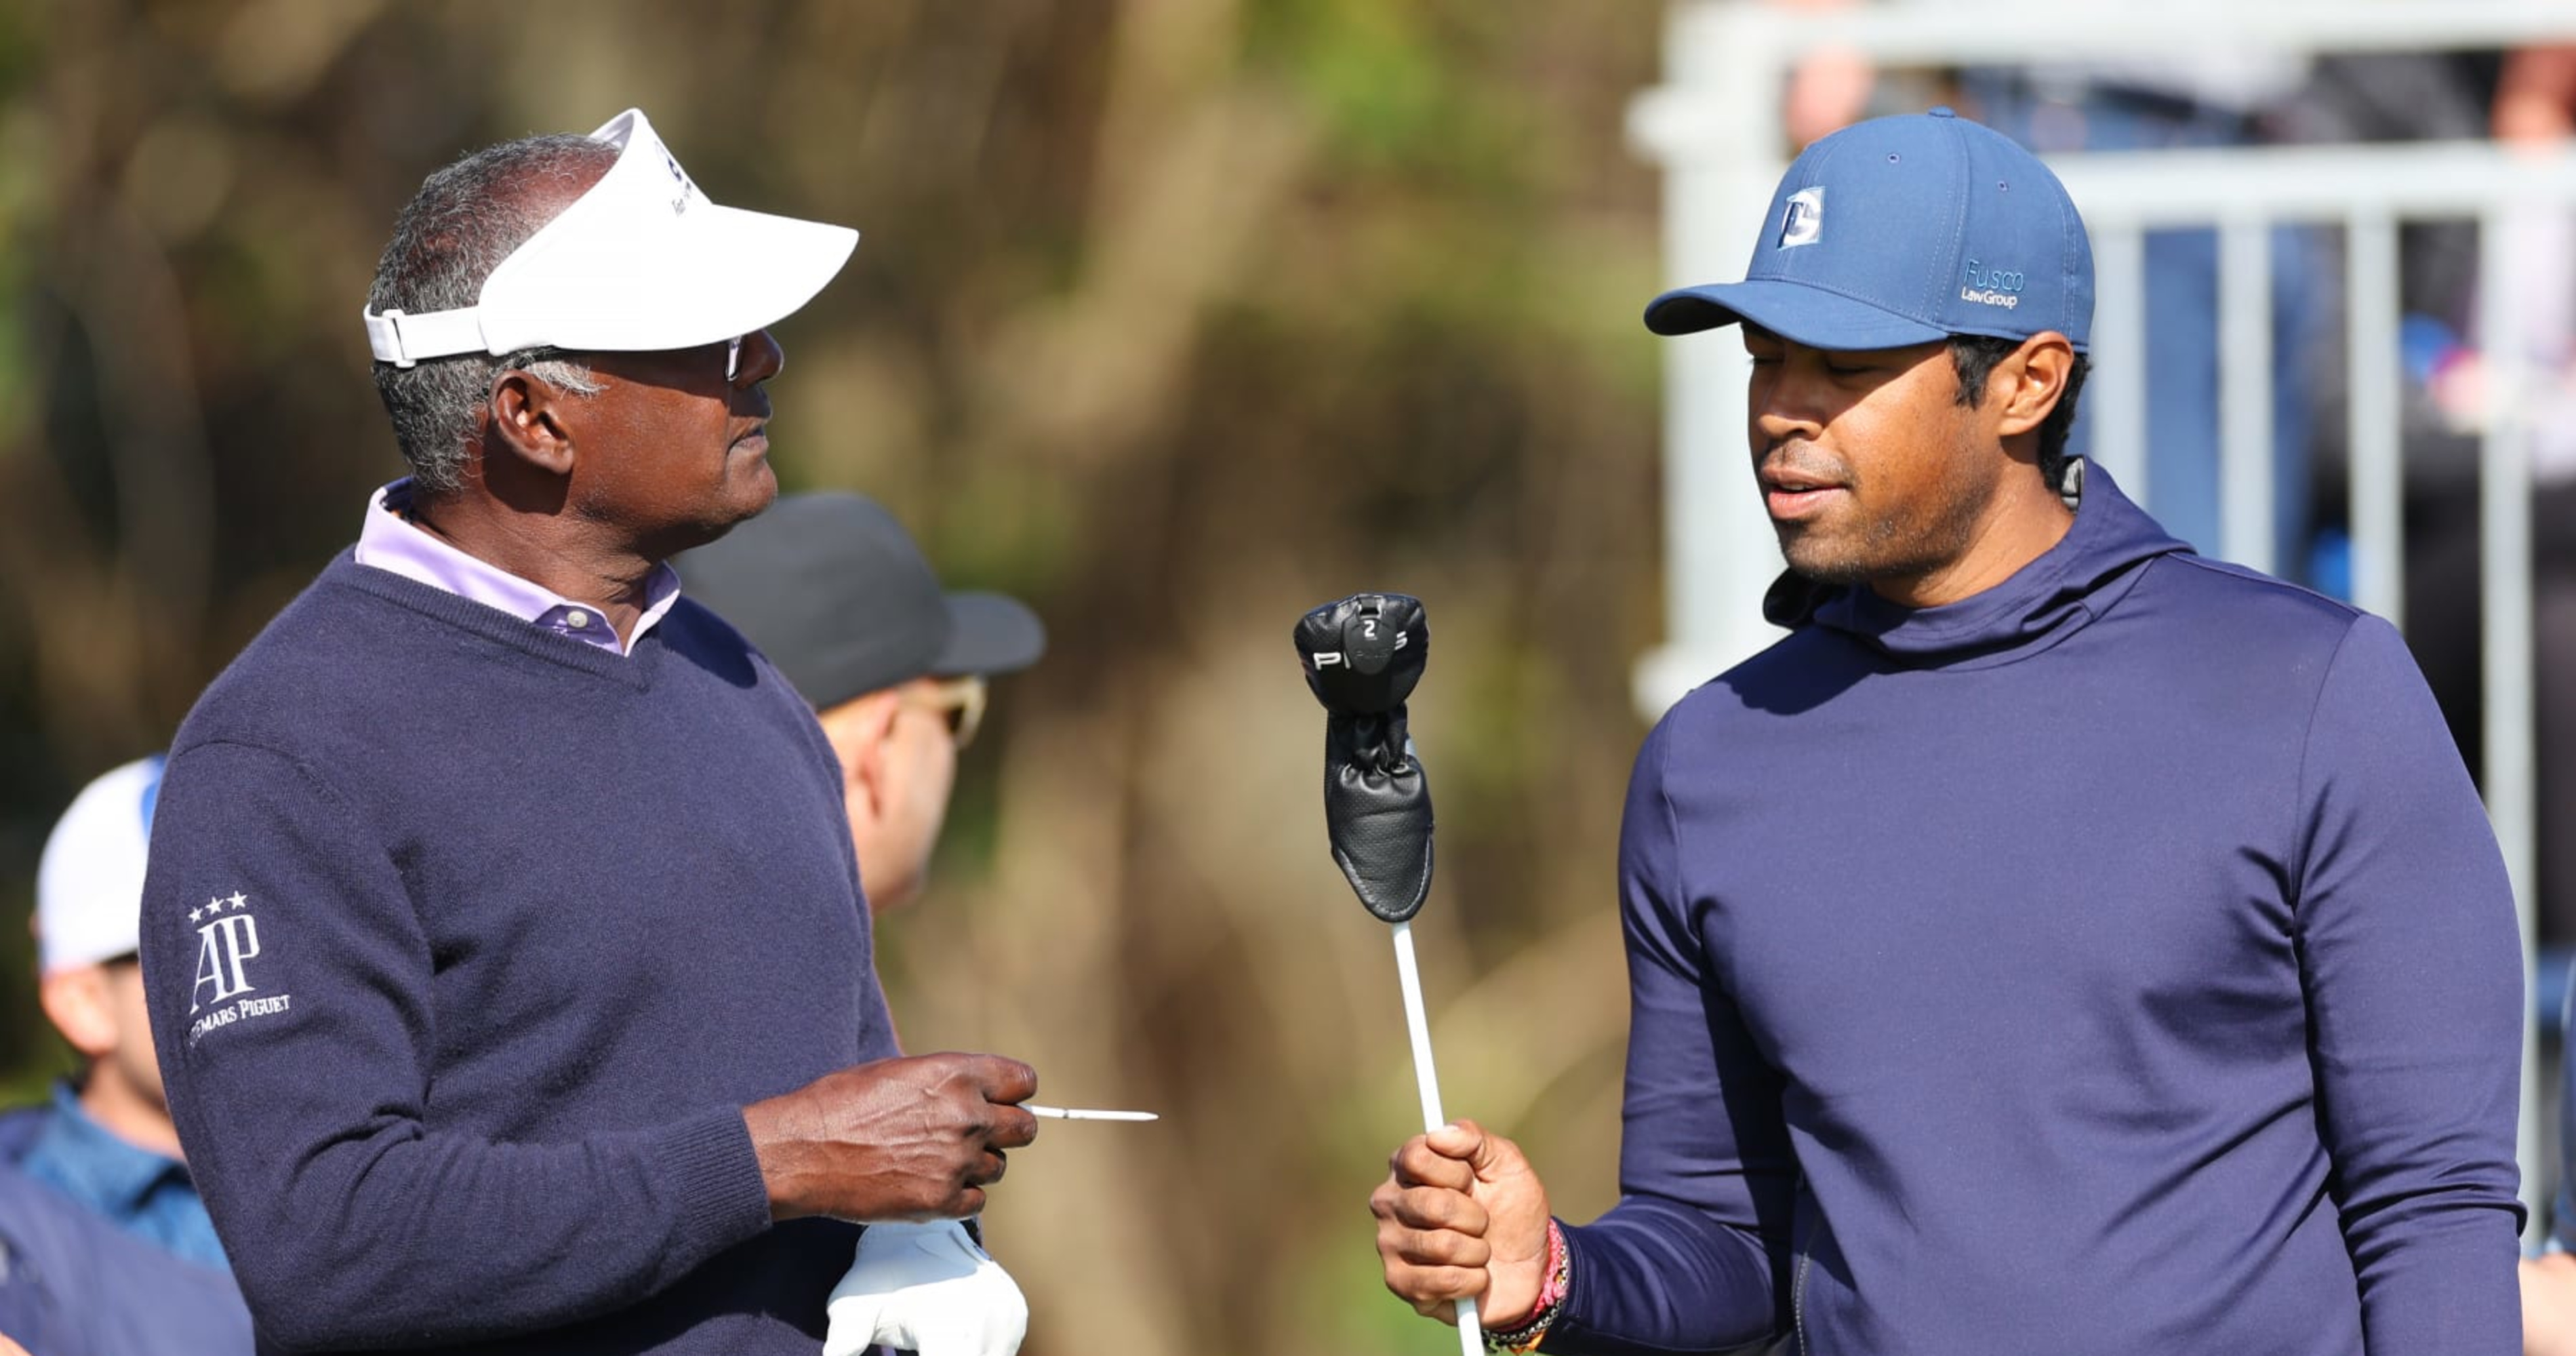 PNC Championship 2022 Vijay Singh's Group Rallies to Win over Tiger